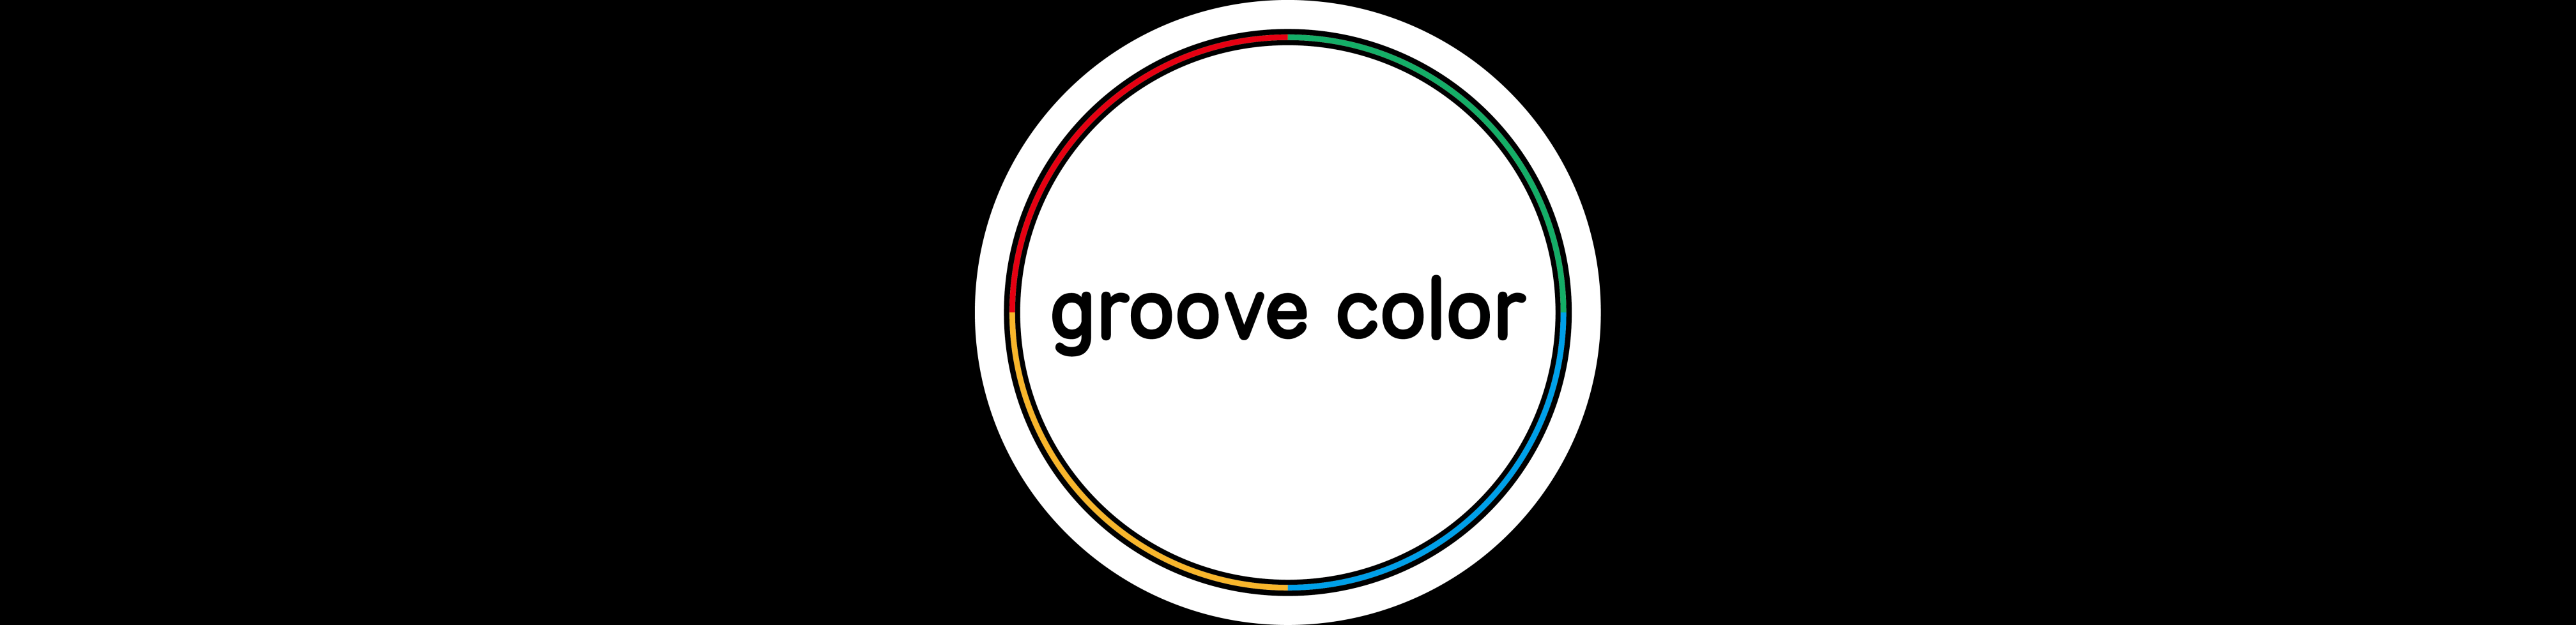 groove color ロゴ